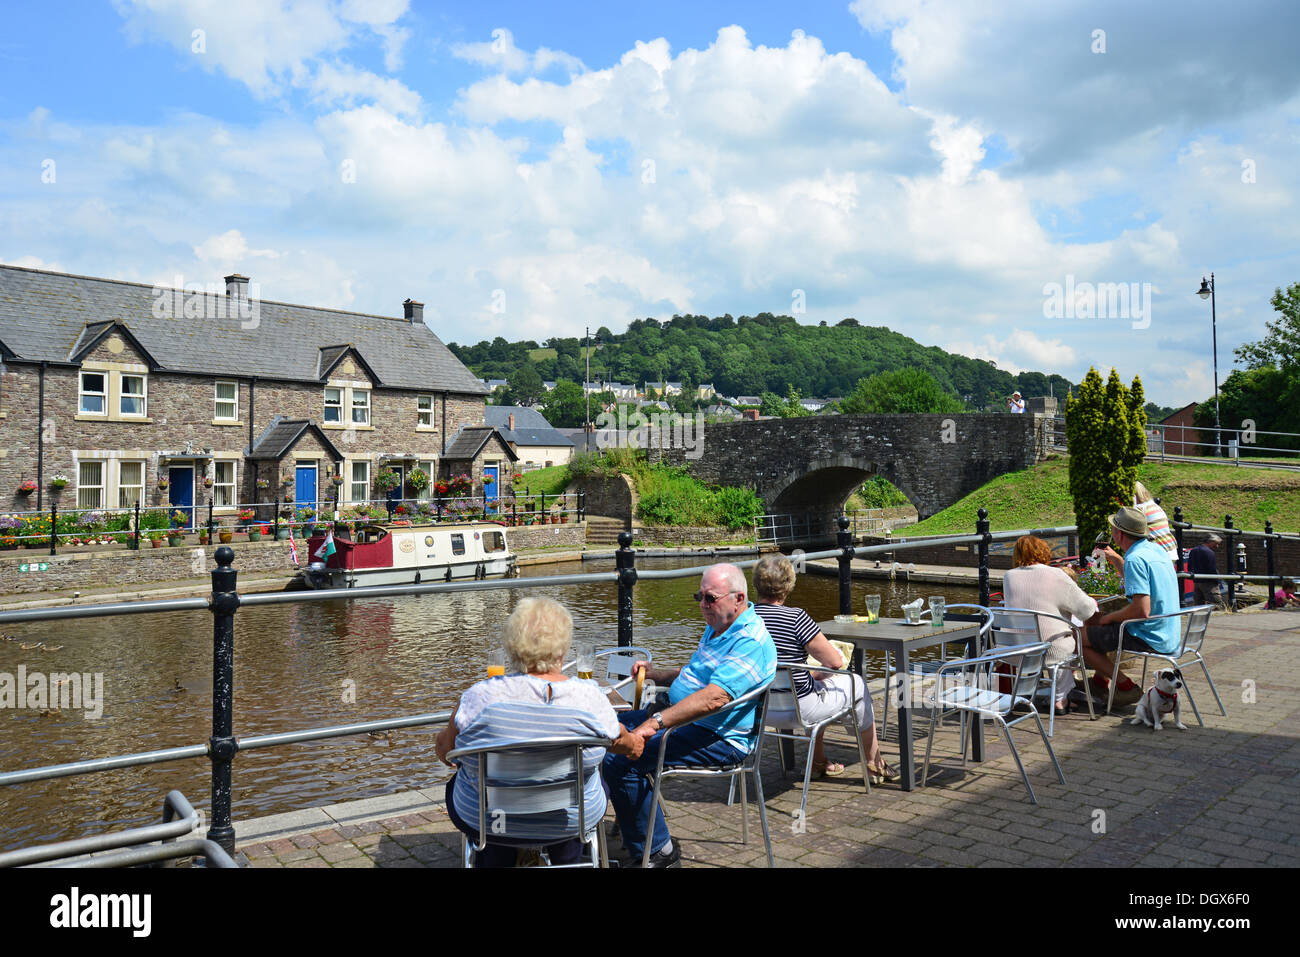 The Monmouthshire and Brecon Canal, Brecon, Brecon Beacons National Park, Powys, Wales, United Kingdom Stock Photo